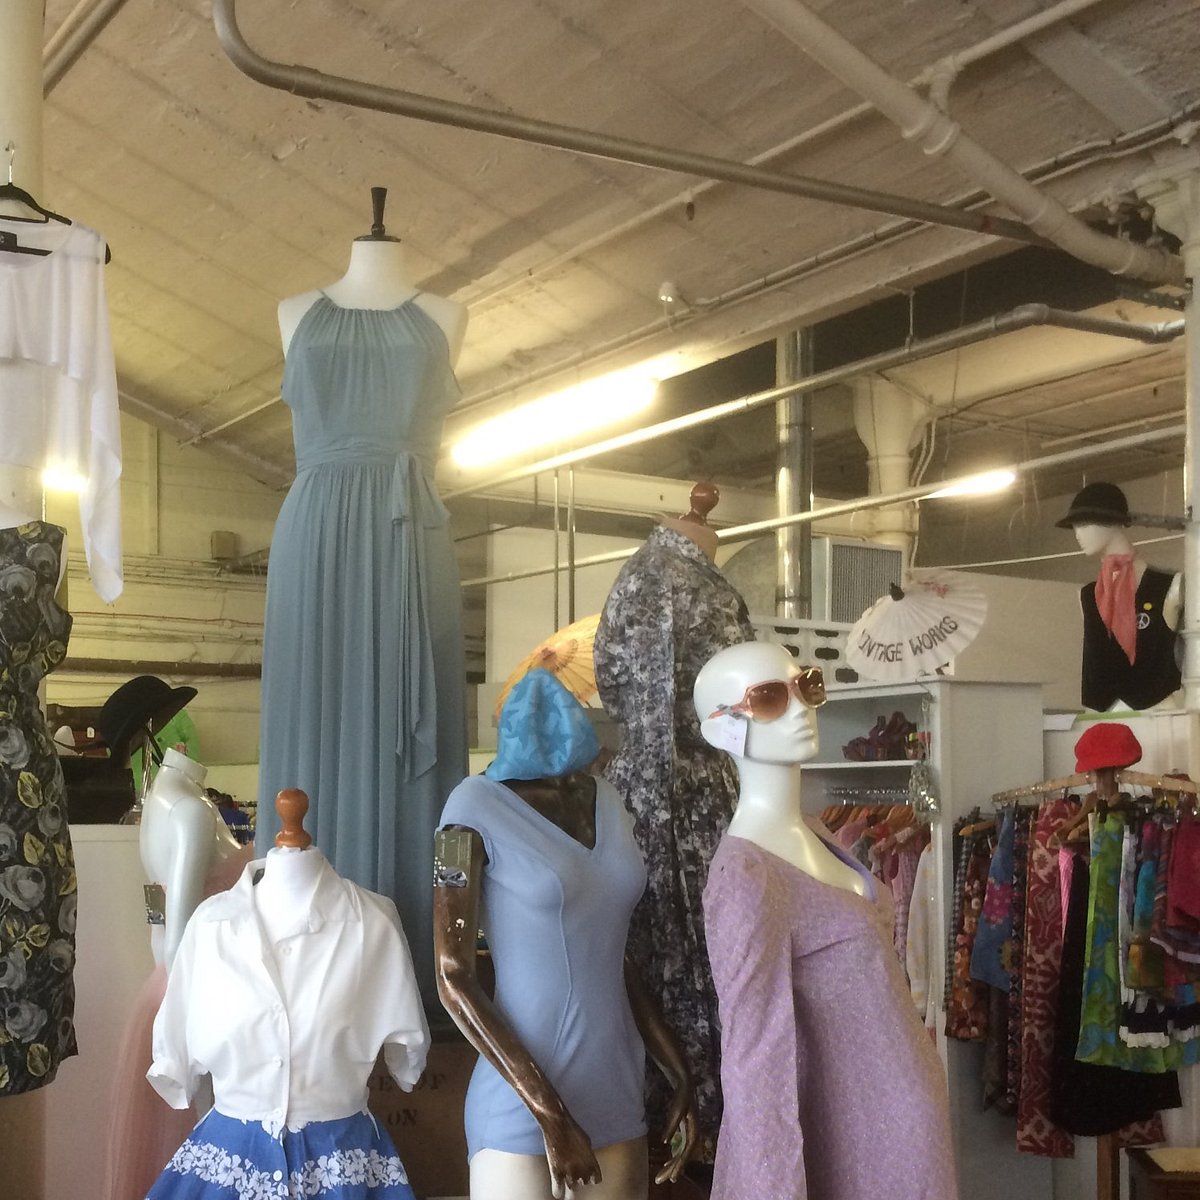 THE VINTAGE EMPORIUM AT PEAR MILL (Stockport) - You Need to Know BEFORE You Go